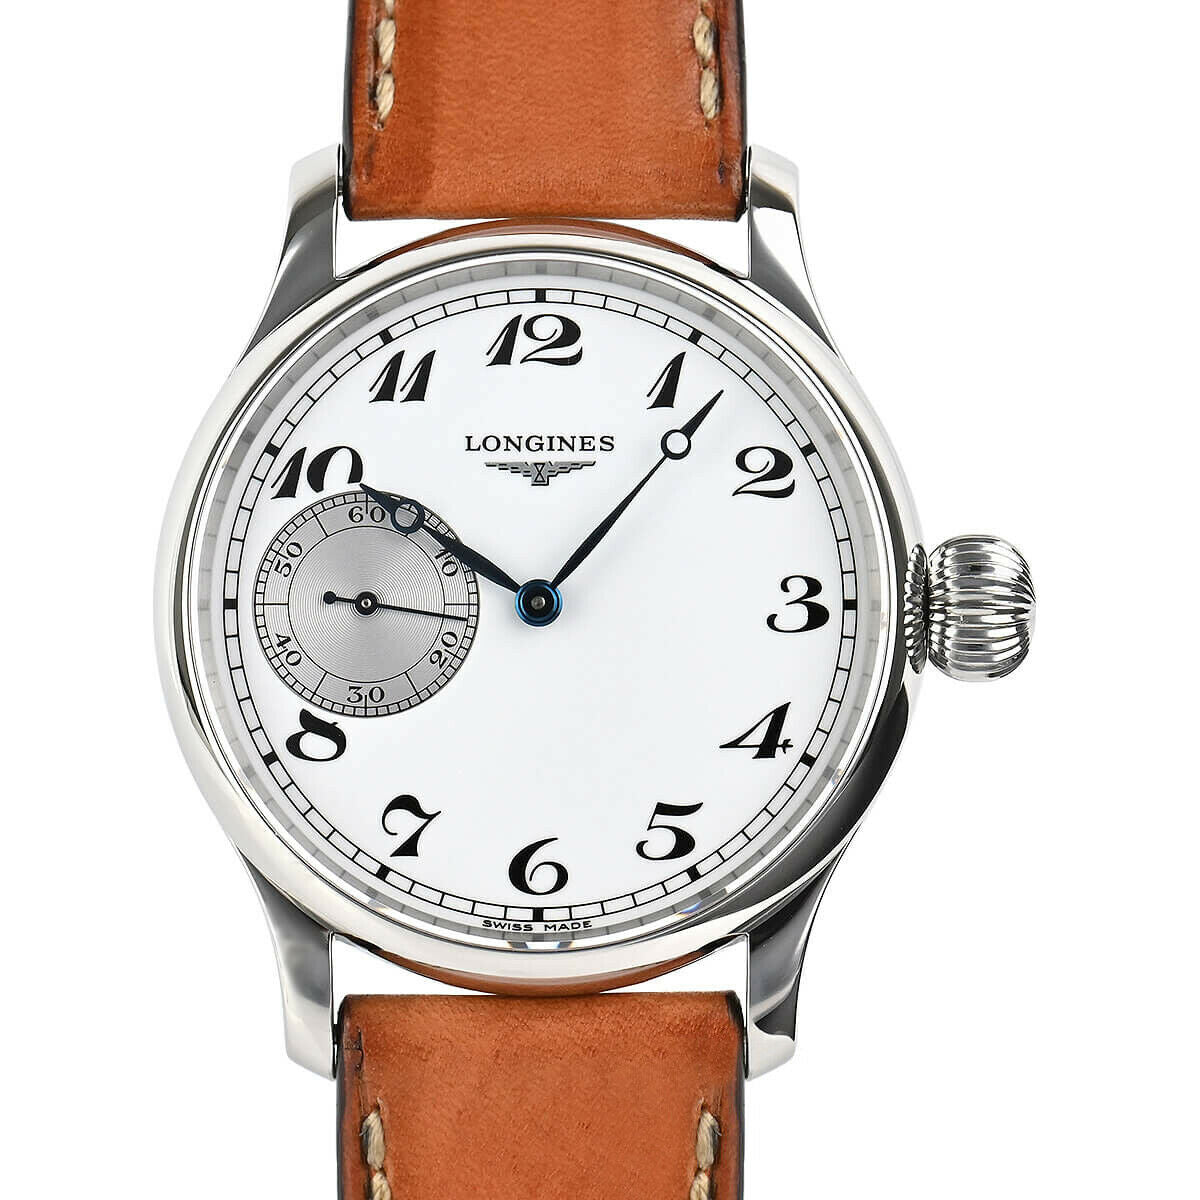 LONGINES Weems Maxi 170th Anniversary Limited L2.639.4 - Japanese-Online-Store (JOS)